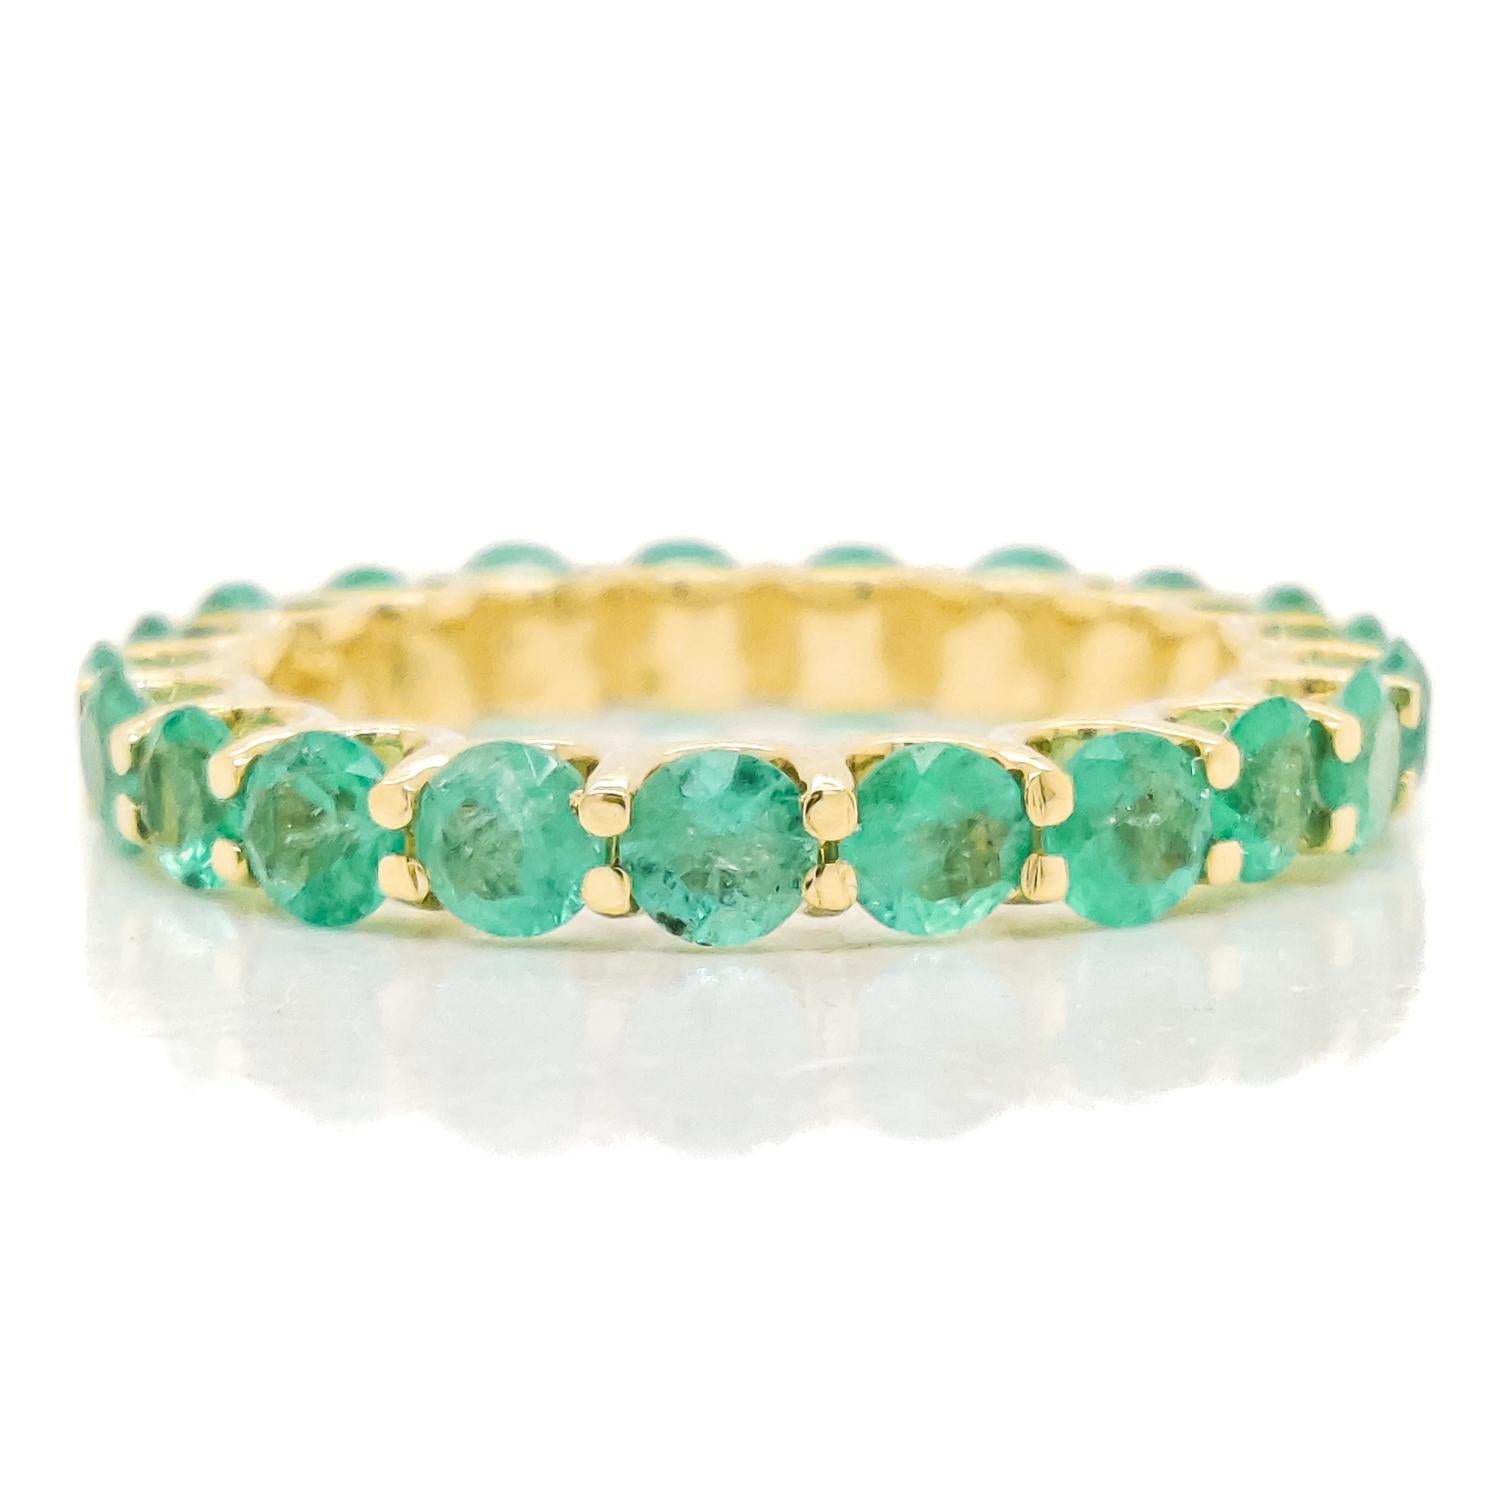 FOR U.S. BUYERS NO VAT 

This breathtaking 2.30-carat emerald eternity ring is truly unique and mesmerizing with its 21 emeralds set in 14kt yellow gold. 
For more information, please check the attached certificate.

